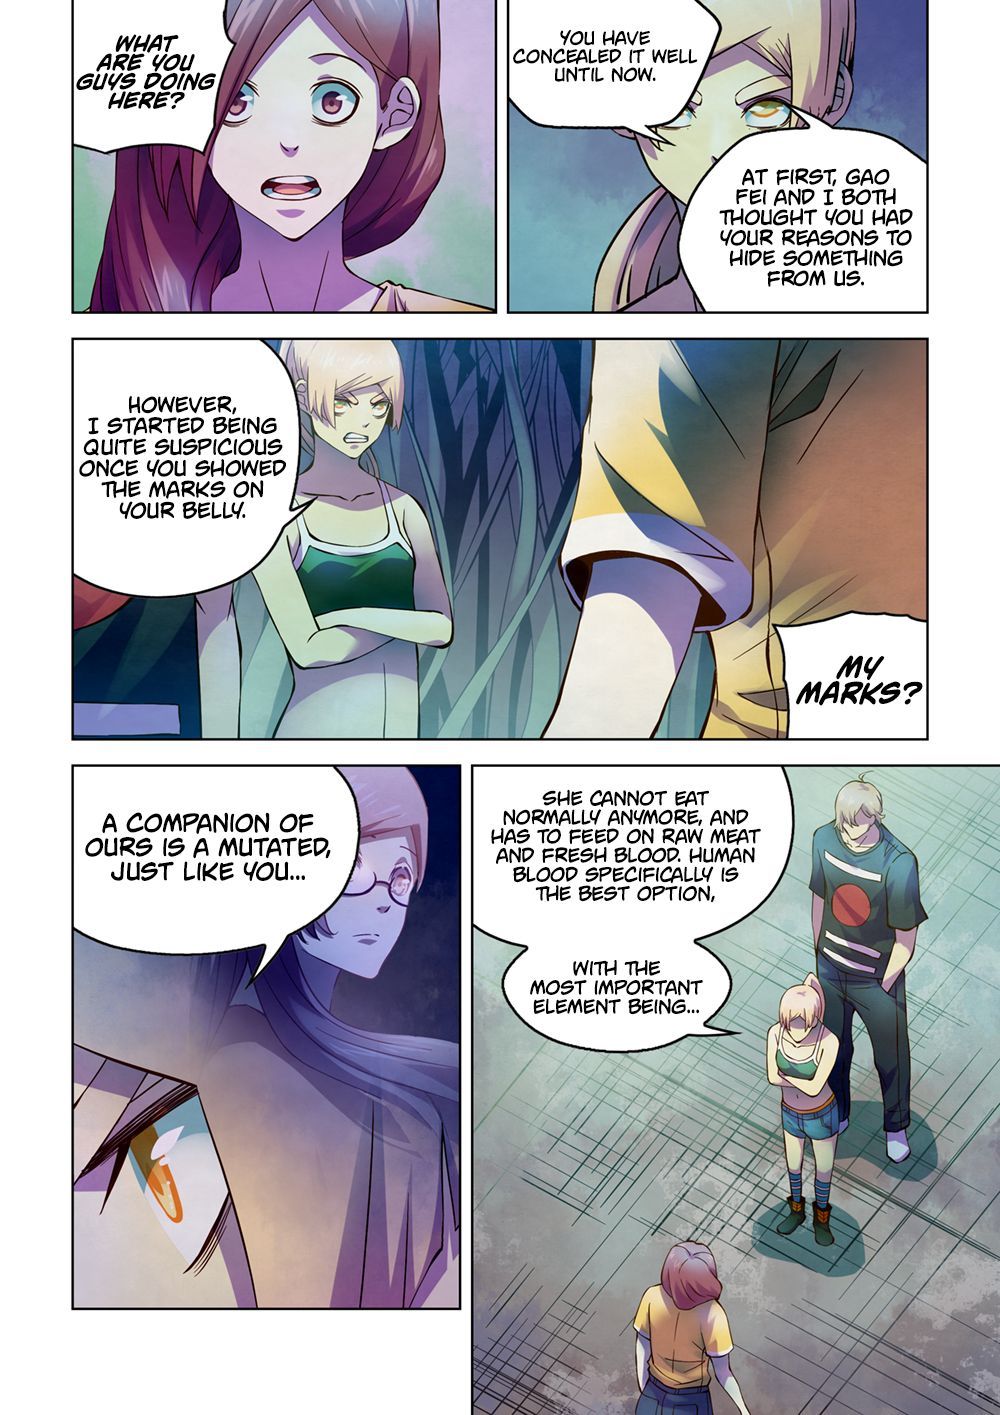 The Last Human Chapter 193 - Page 2